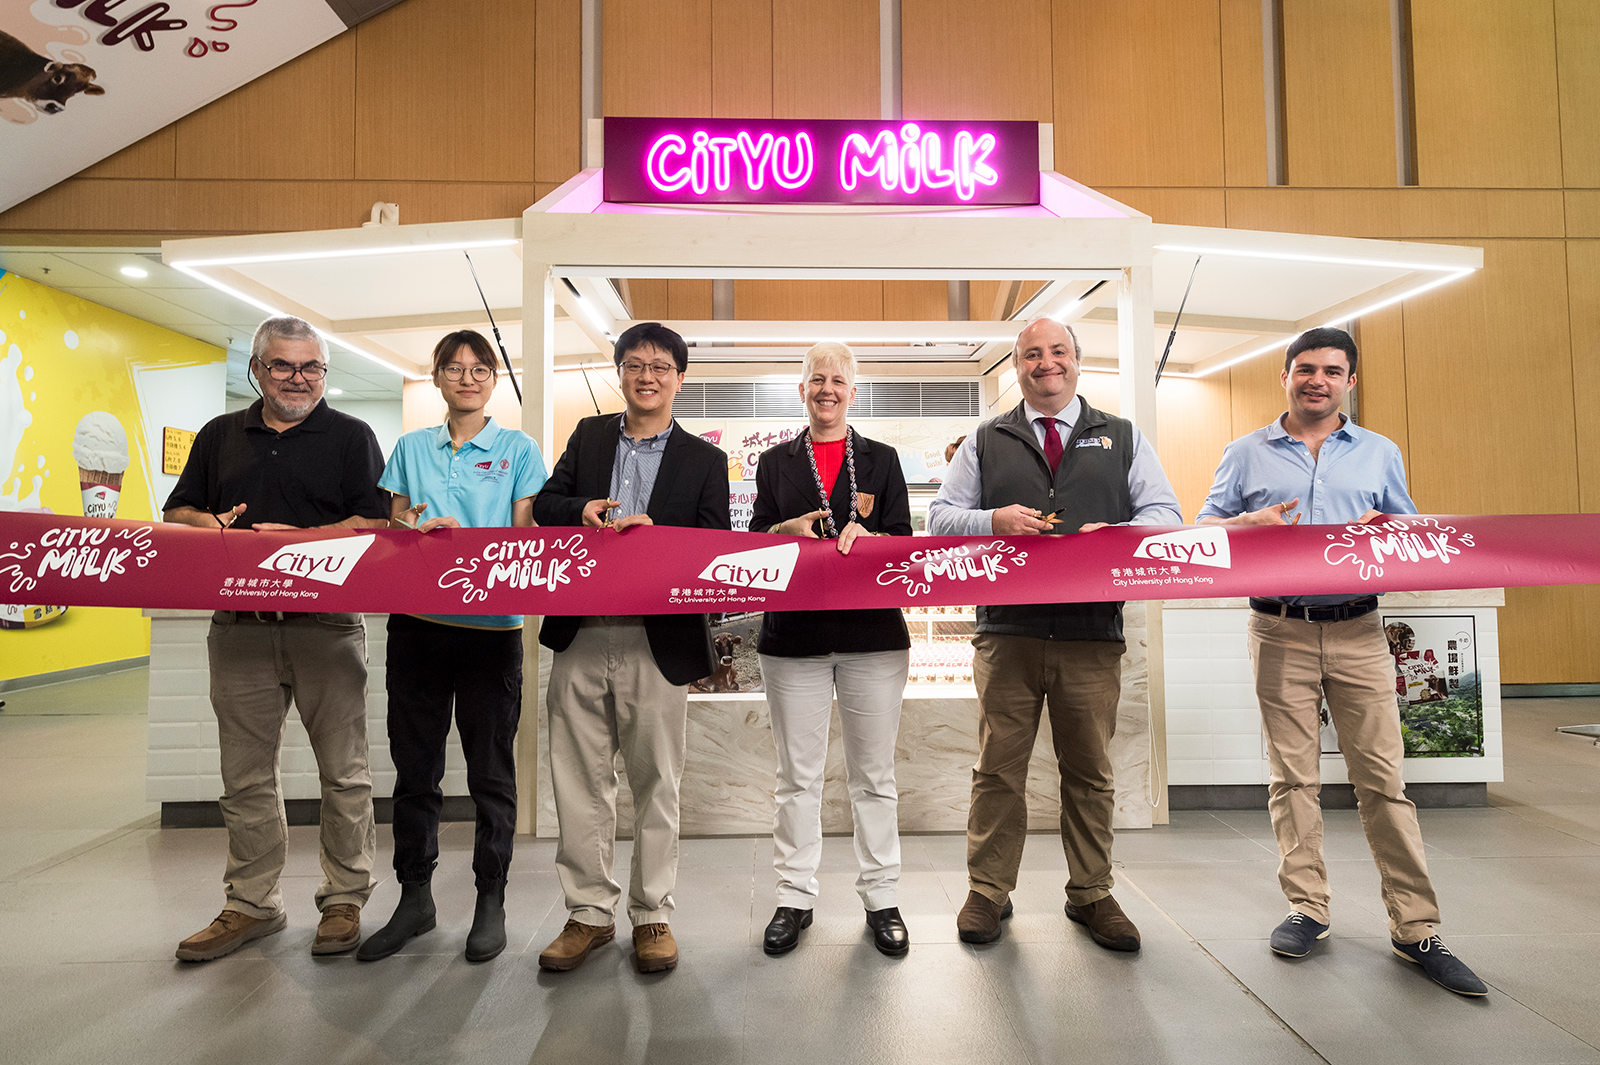 (From left) Professor Pedro Melendez, Clinical Professor of Department of Veterinary Clinical Sciences (VCS), Dr Joyce Ip, Dairy Farm Officer, Mr Paul Ko, Professor Vanessa Barrs, Dr Eryl Done and Dr Eloi Guarnieri, Clinical Assistant Professor of VCS, officiated at the opening ceremony of the CityU Milk Product Counter.